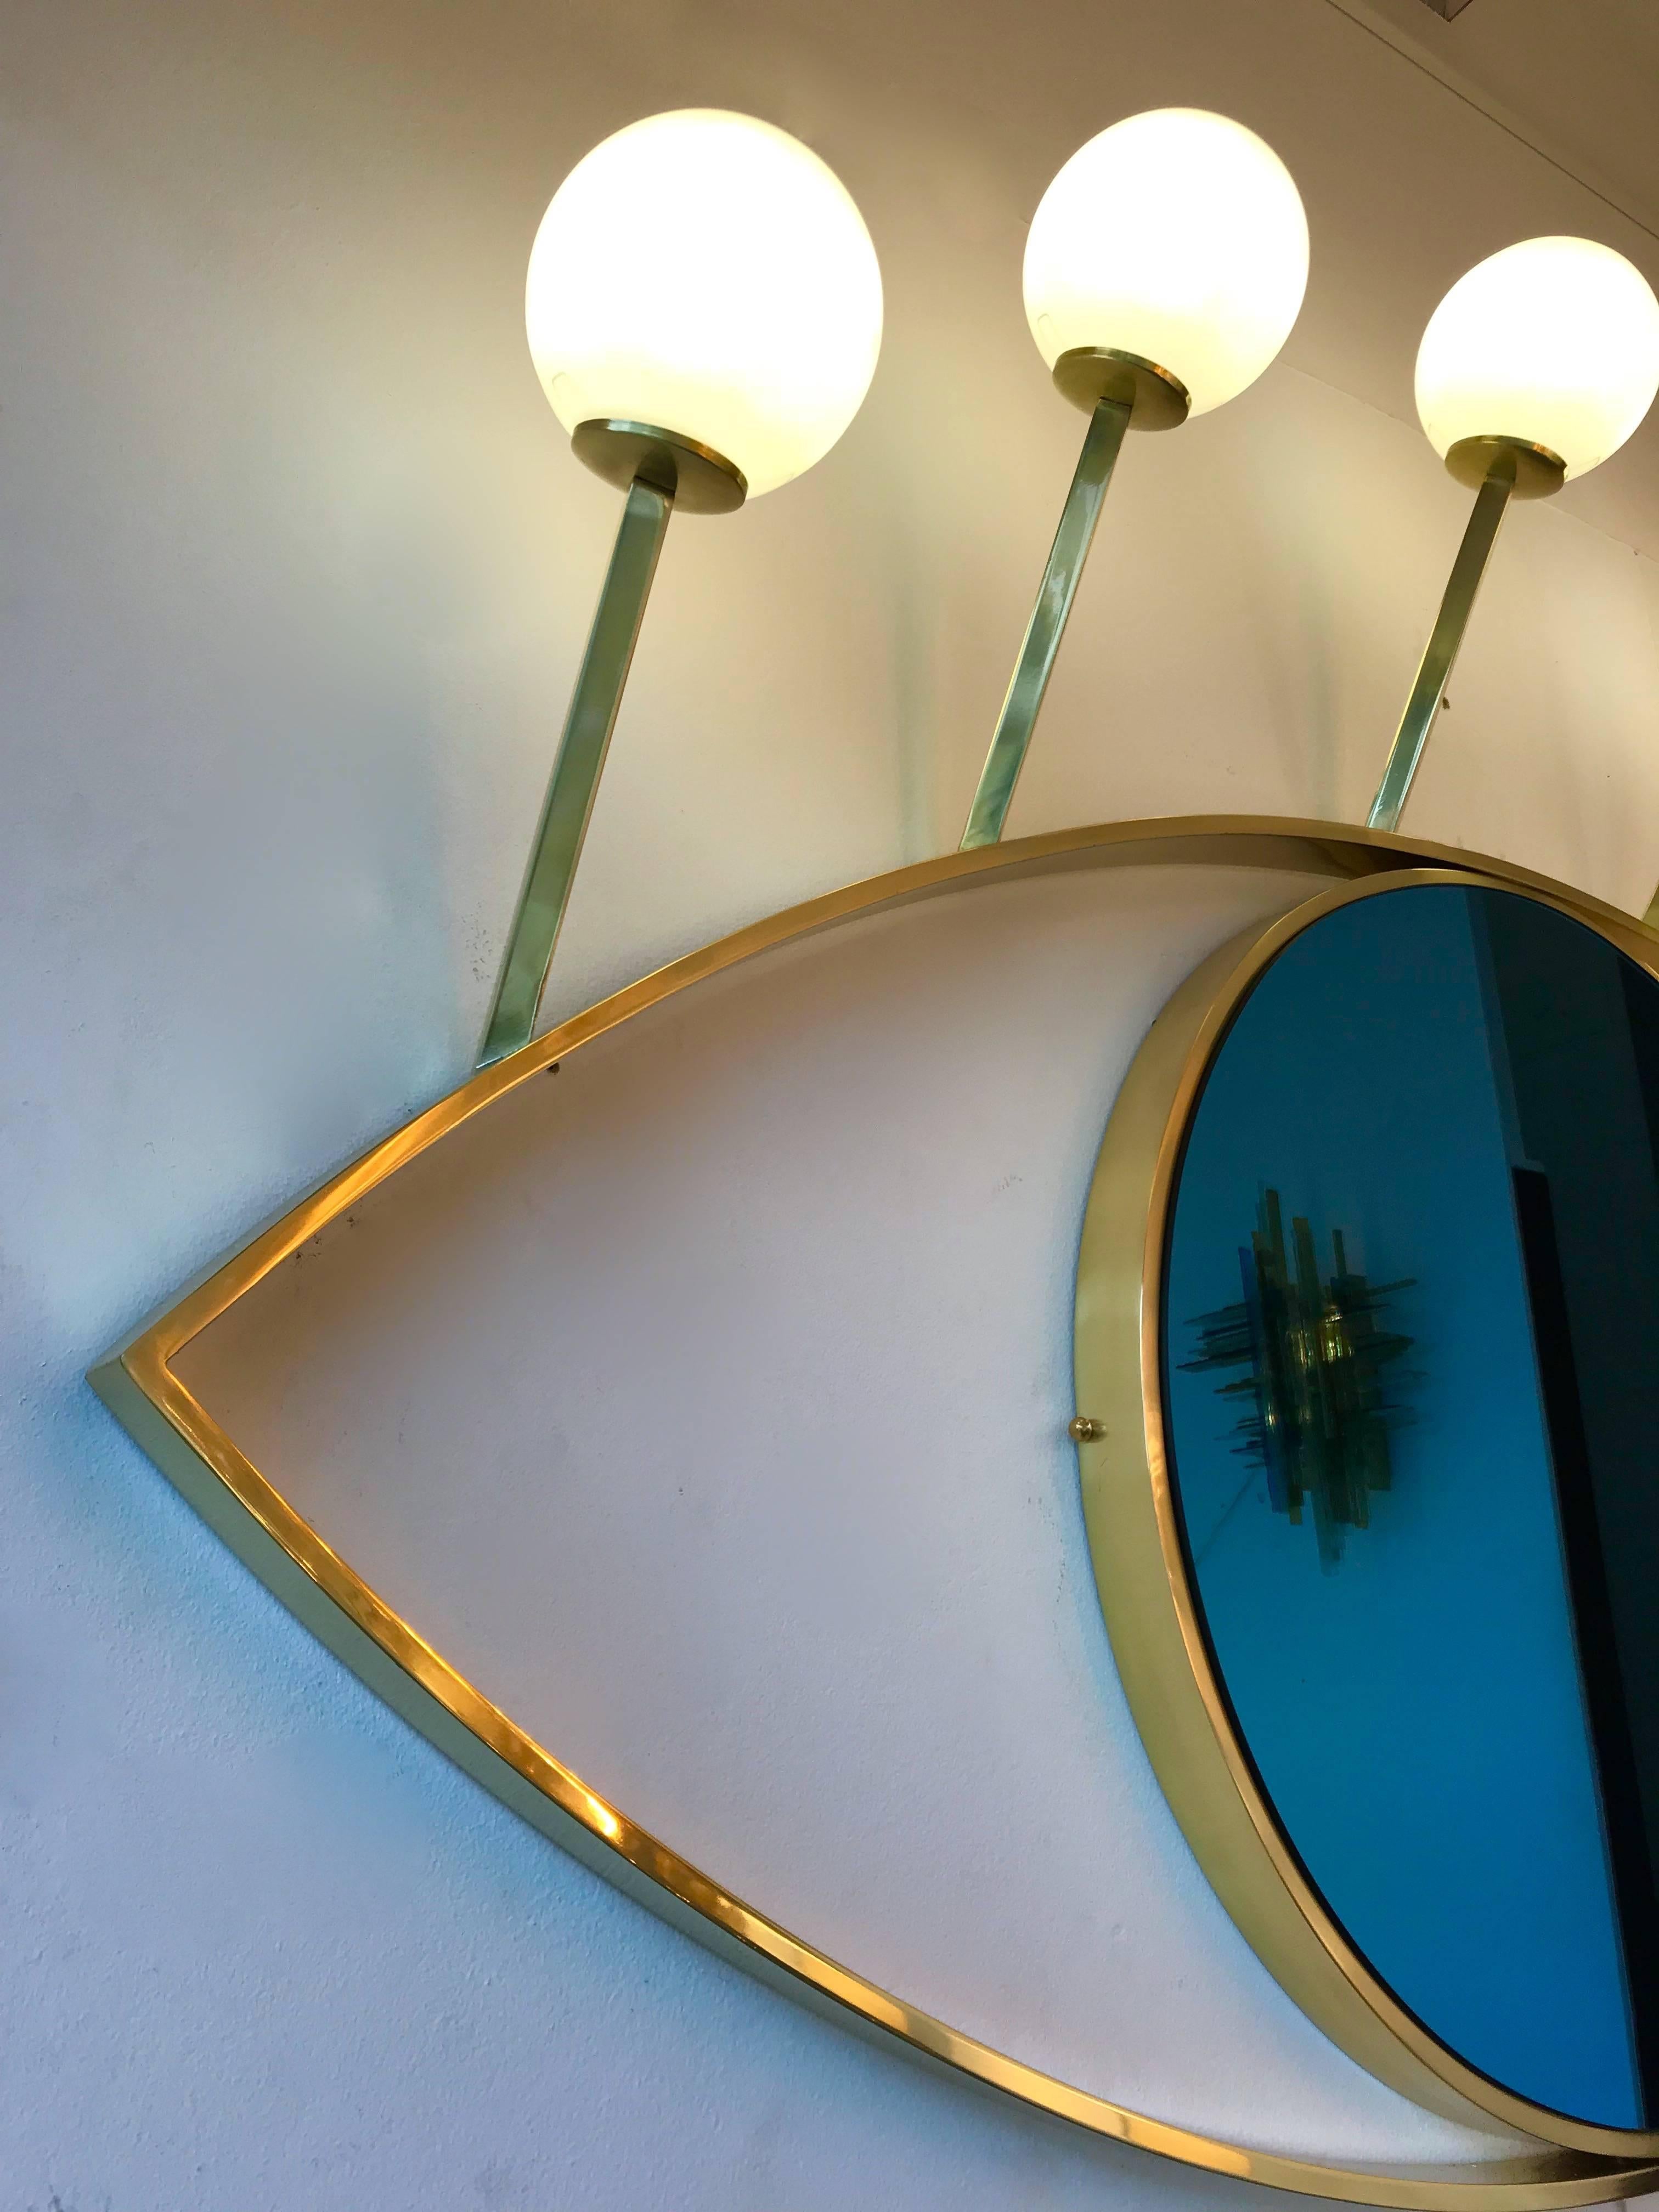 Blue eyes full brass lightning mirror with sconces wall lamps lights. Opaline glass ball. Few exclusive contemporary work production from a small artisanal Italian design workshop, in a Mid-Century modern mood